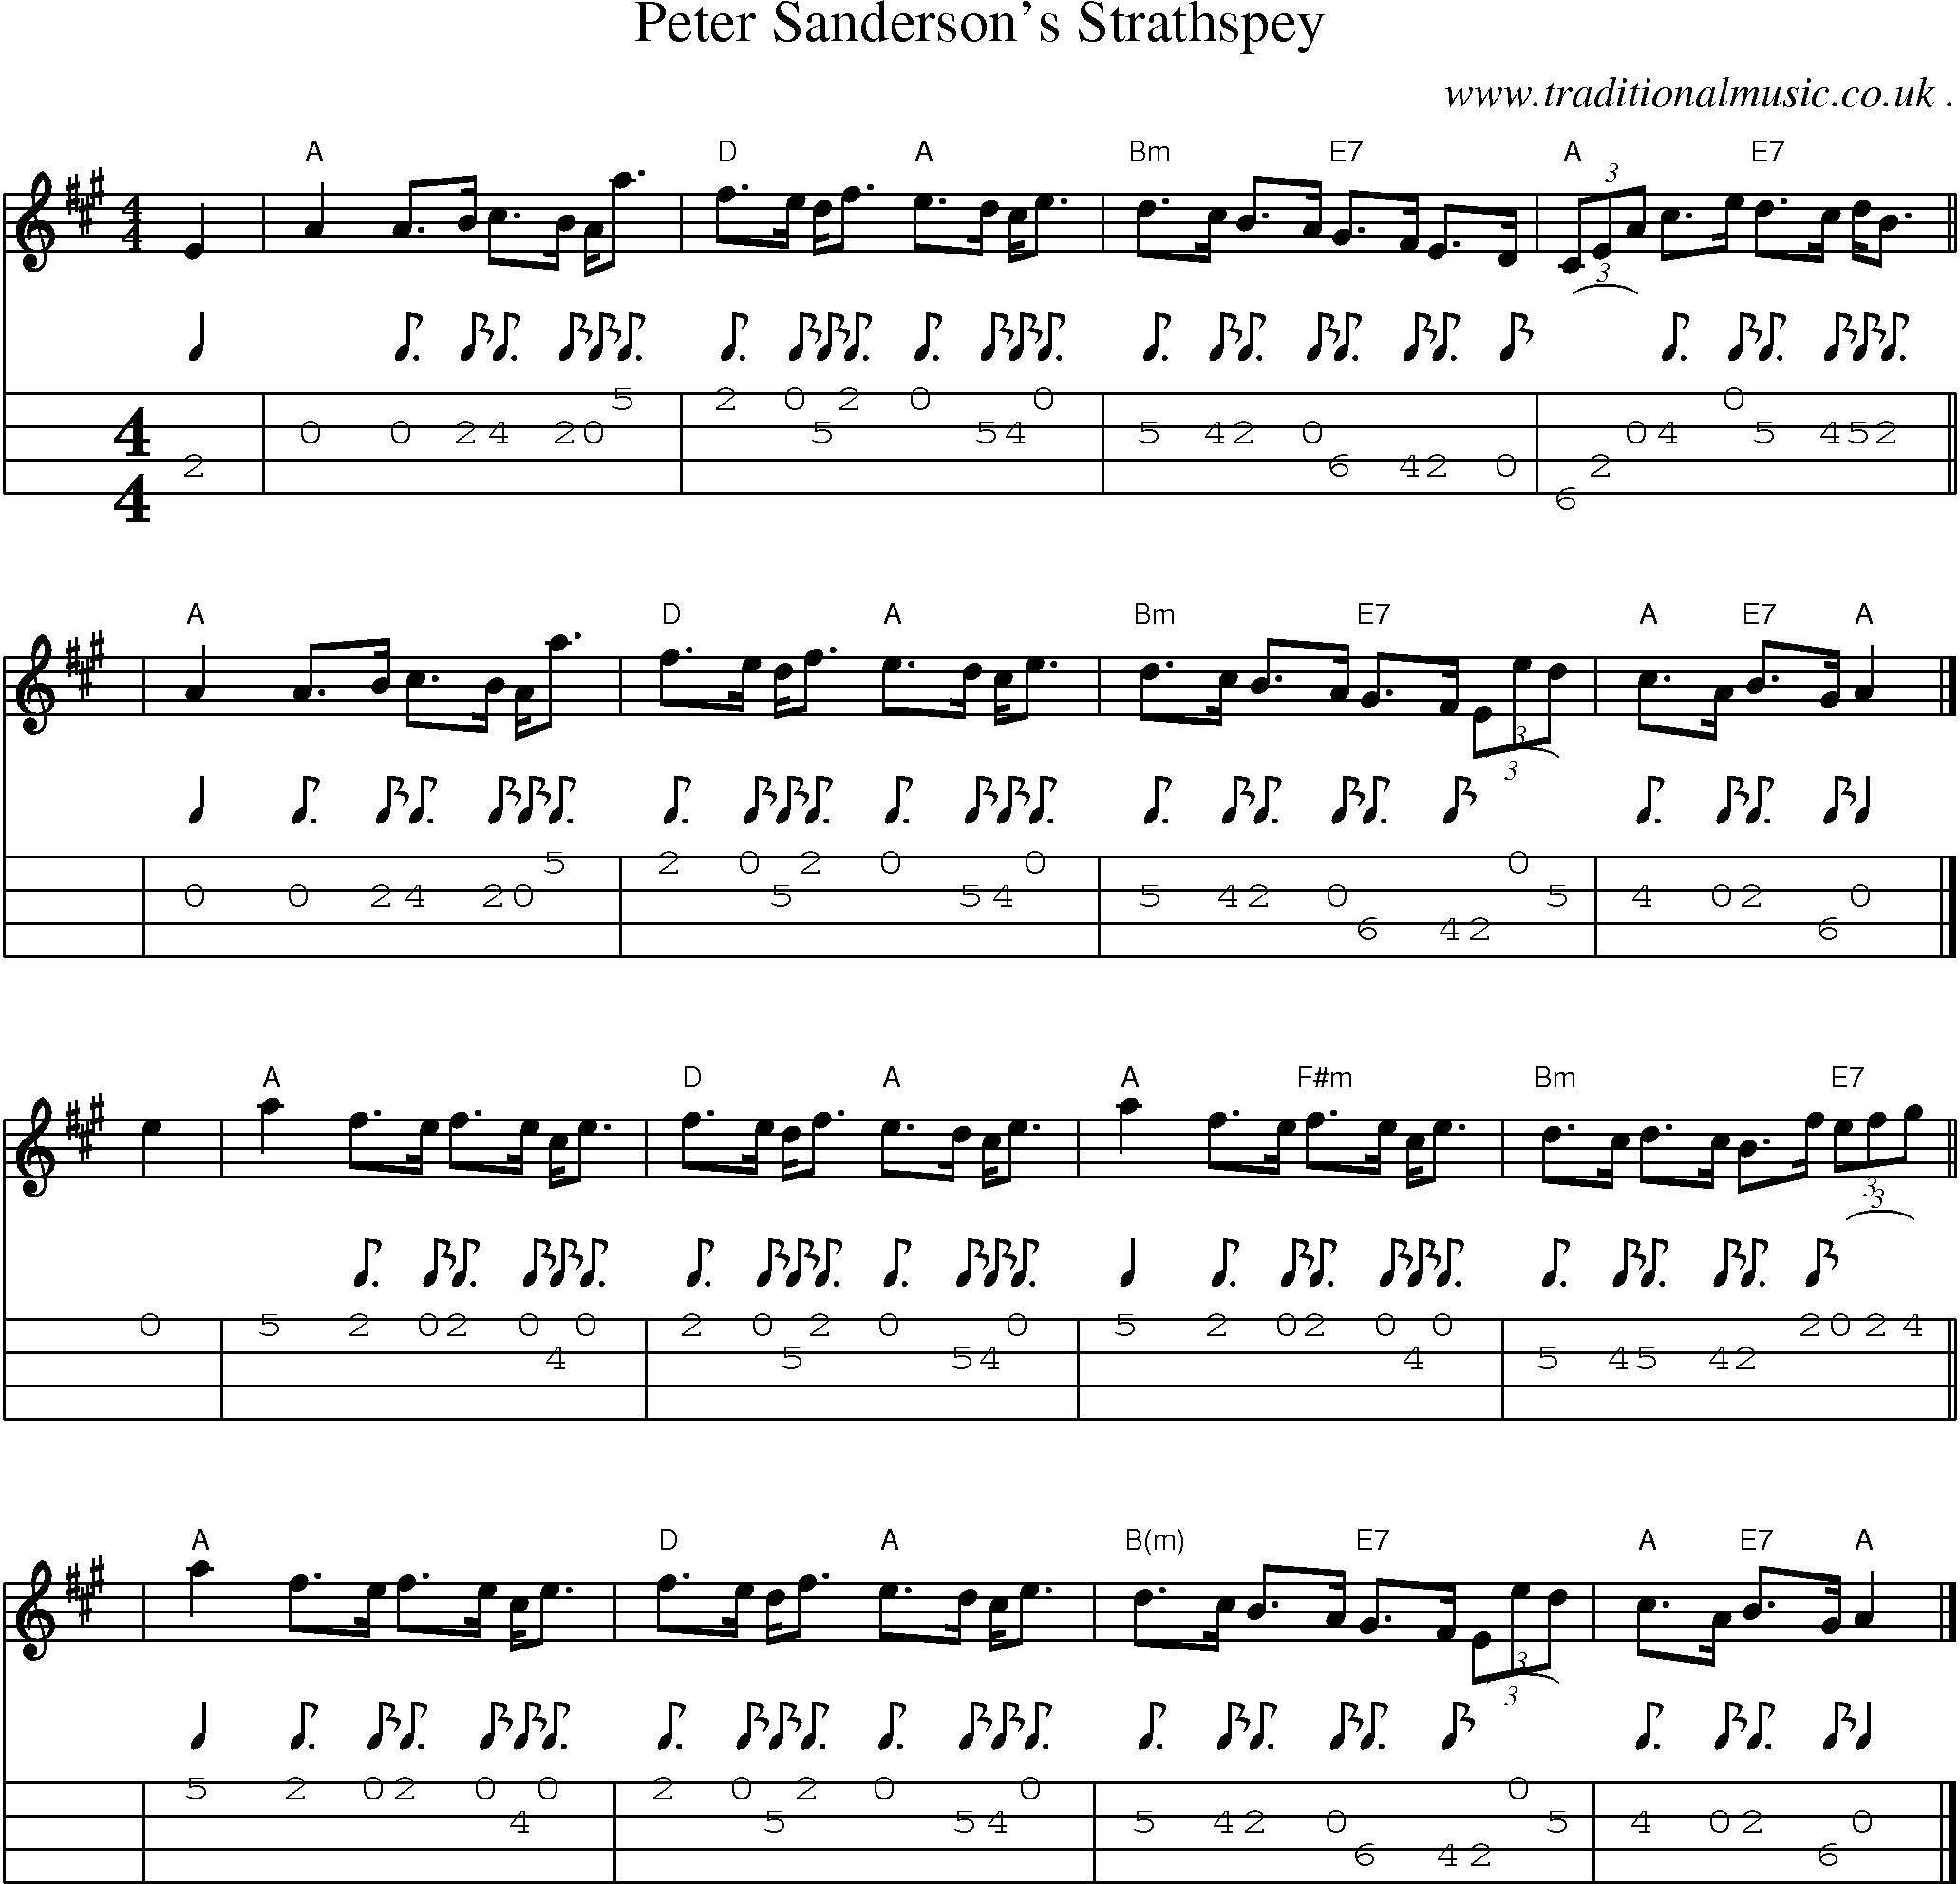 Sheet-music  score, Chords and Mandolin Tabs for Peter Sandersons Strathspey